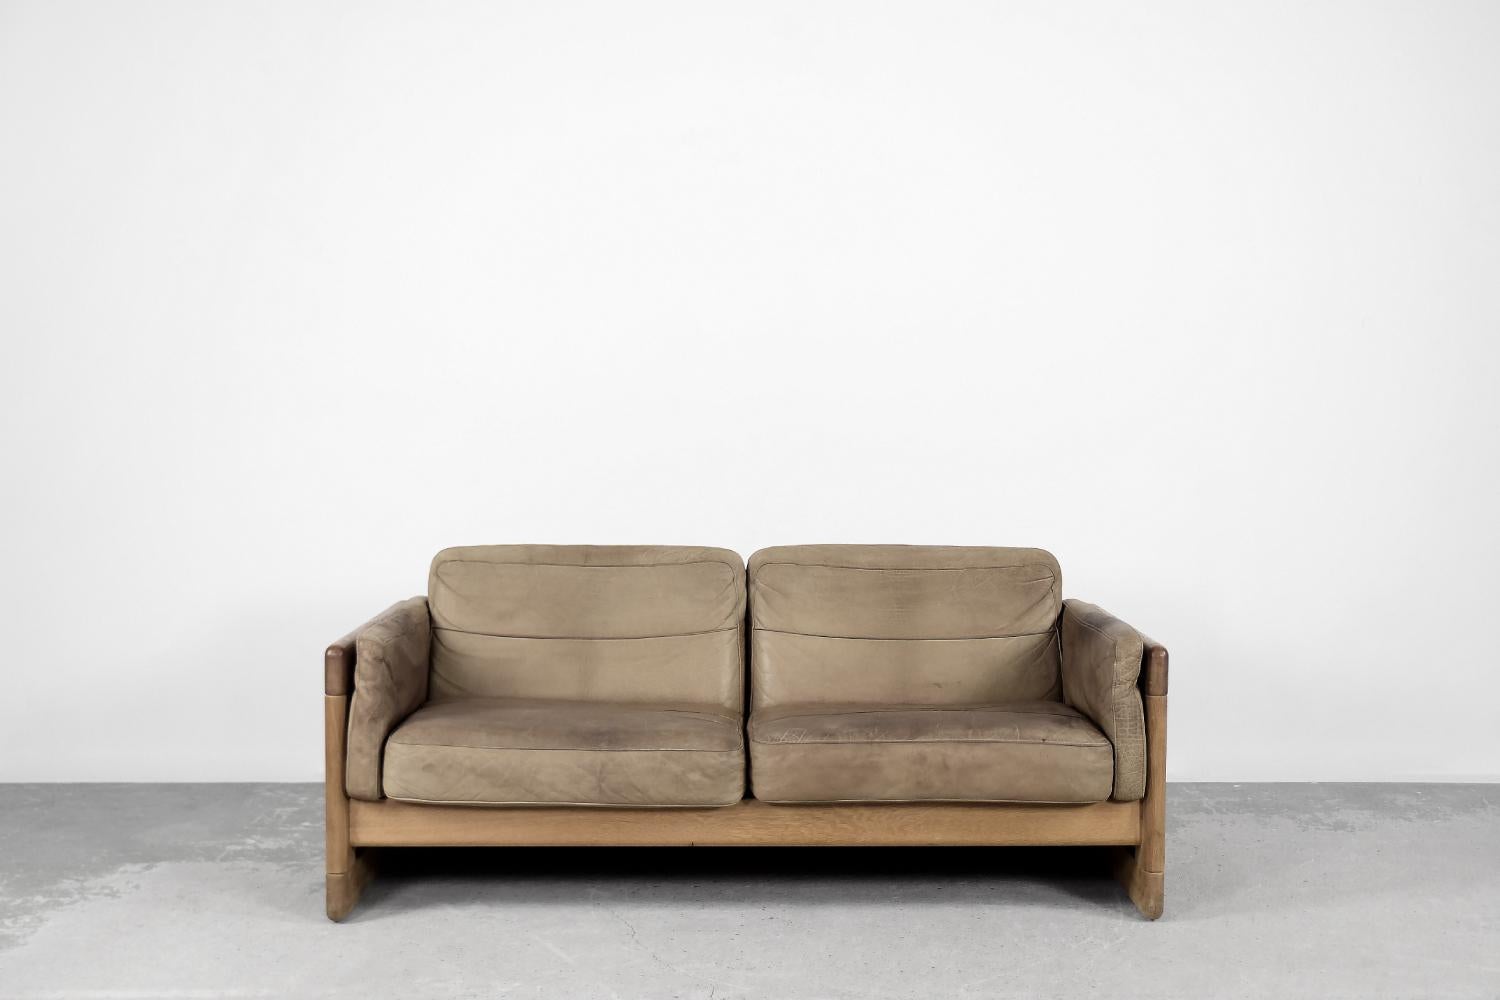 This two-seater sofa was produced in Scandinavia during the 1970s. The frame is made of solid oak wood with a natural color. The cushions are upholstered with natural leather in a shade of coffee brown. The sofa is equipped with side cushions. The